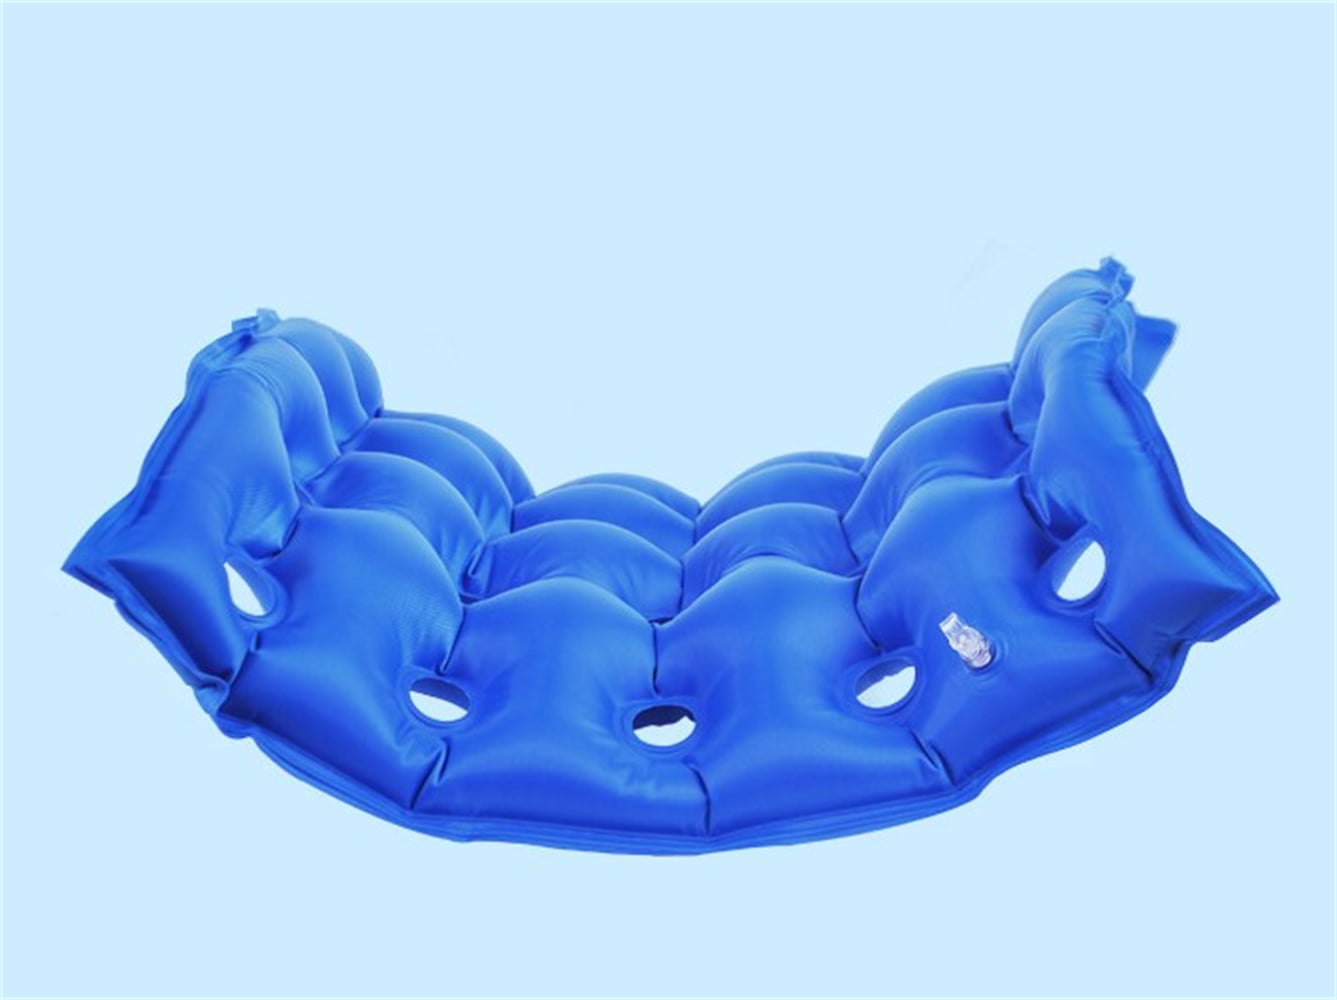 17.7 in Inflatable Seat Cushion by Happon - Blue Travel Seat Pad for  Airplane, Car, Office, Wheelchair - Adjustable Pressure Pillow for Sitting  Pain